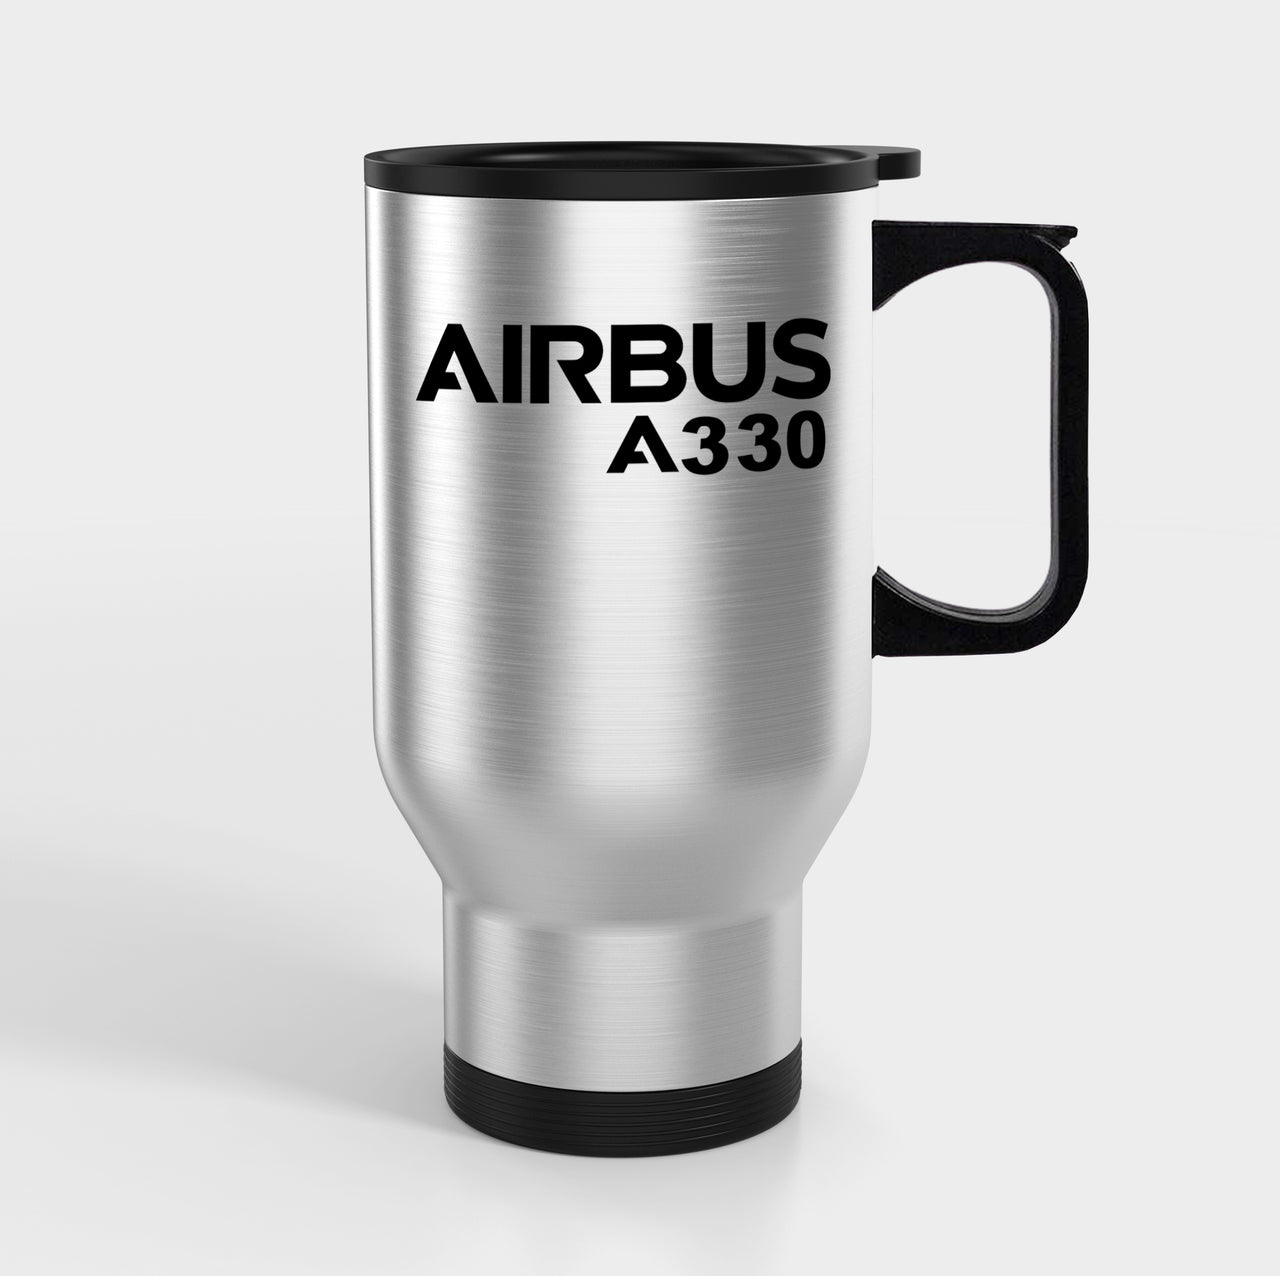 Airbus A330 & Text Designed Travel Mugs (With Holder)